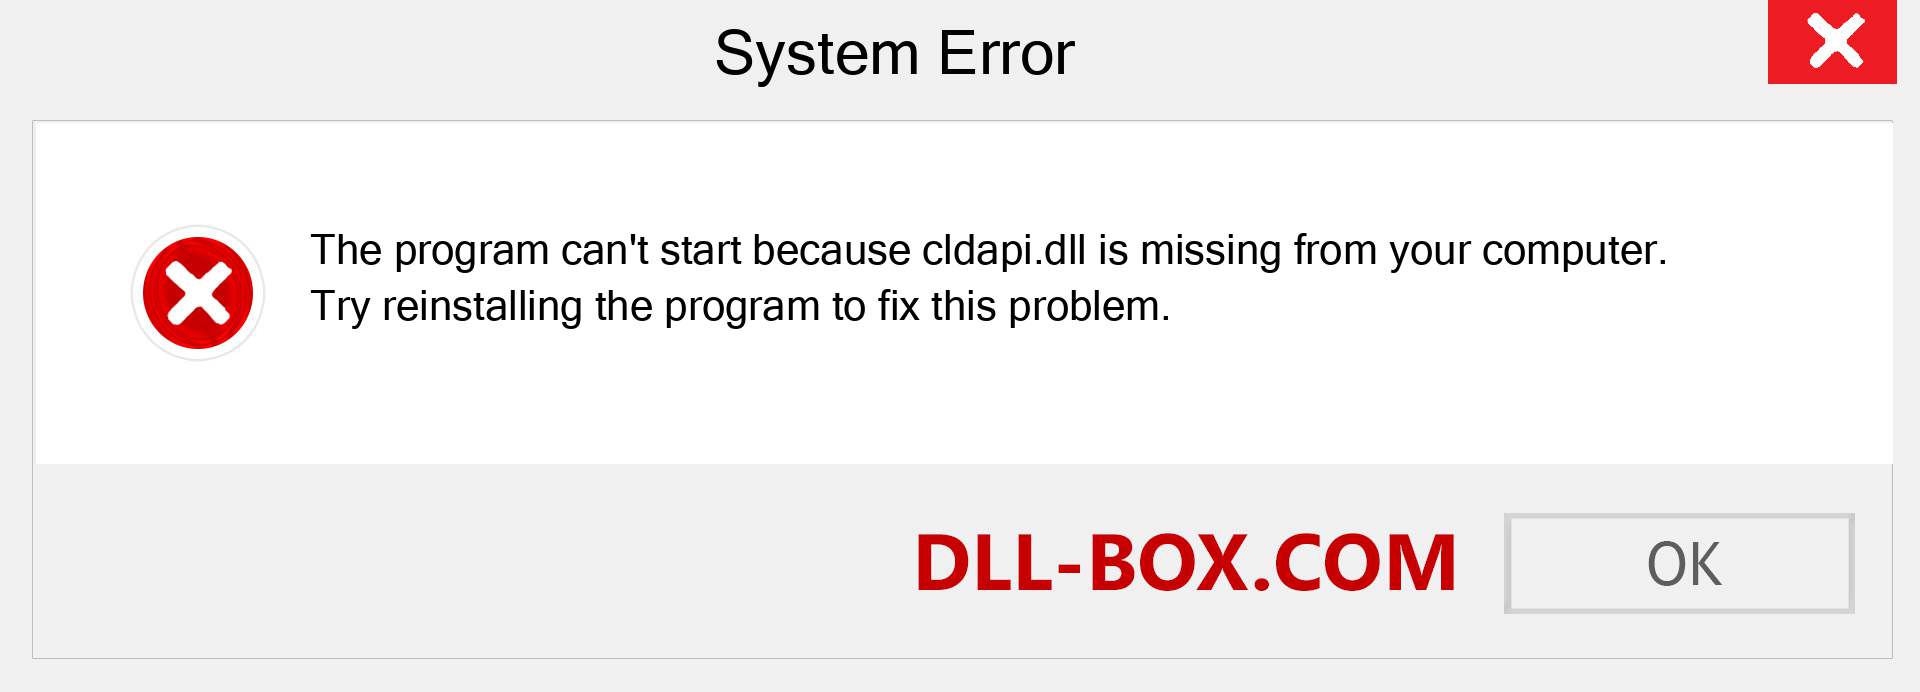  cldapi.dll file is missing?. Download for Windows 7, 8, 10 - Fix  cldapi dll Missing Error on Windows, photos, images